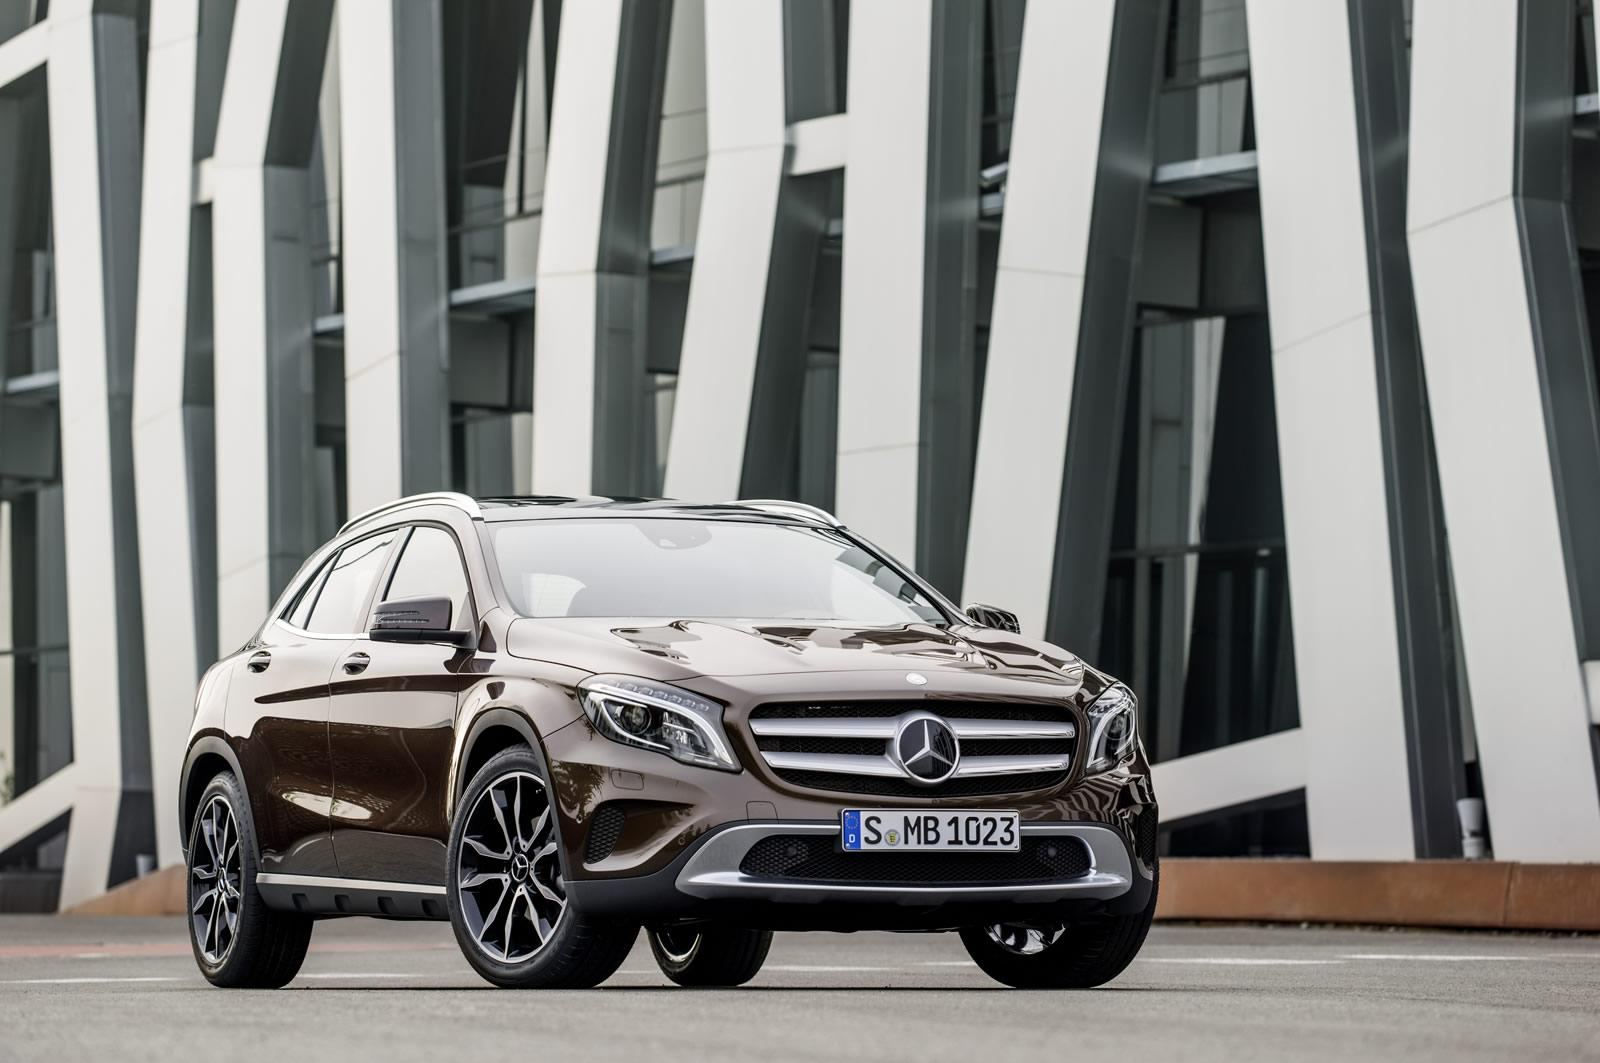 Mercedes GLA 2014 photo 101413 pictures at high resolution